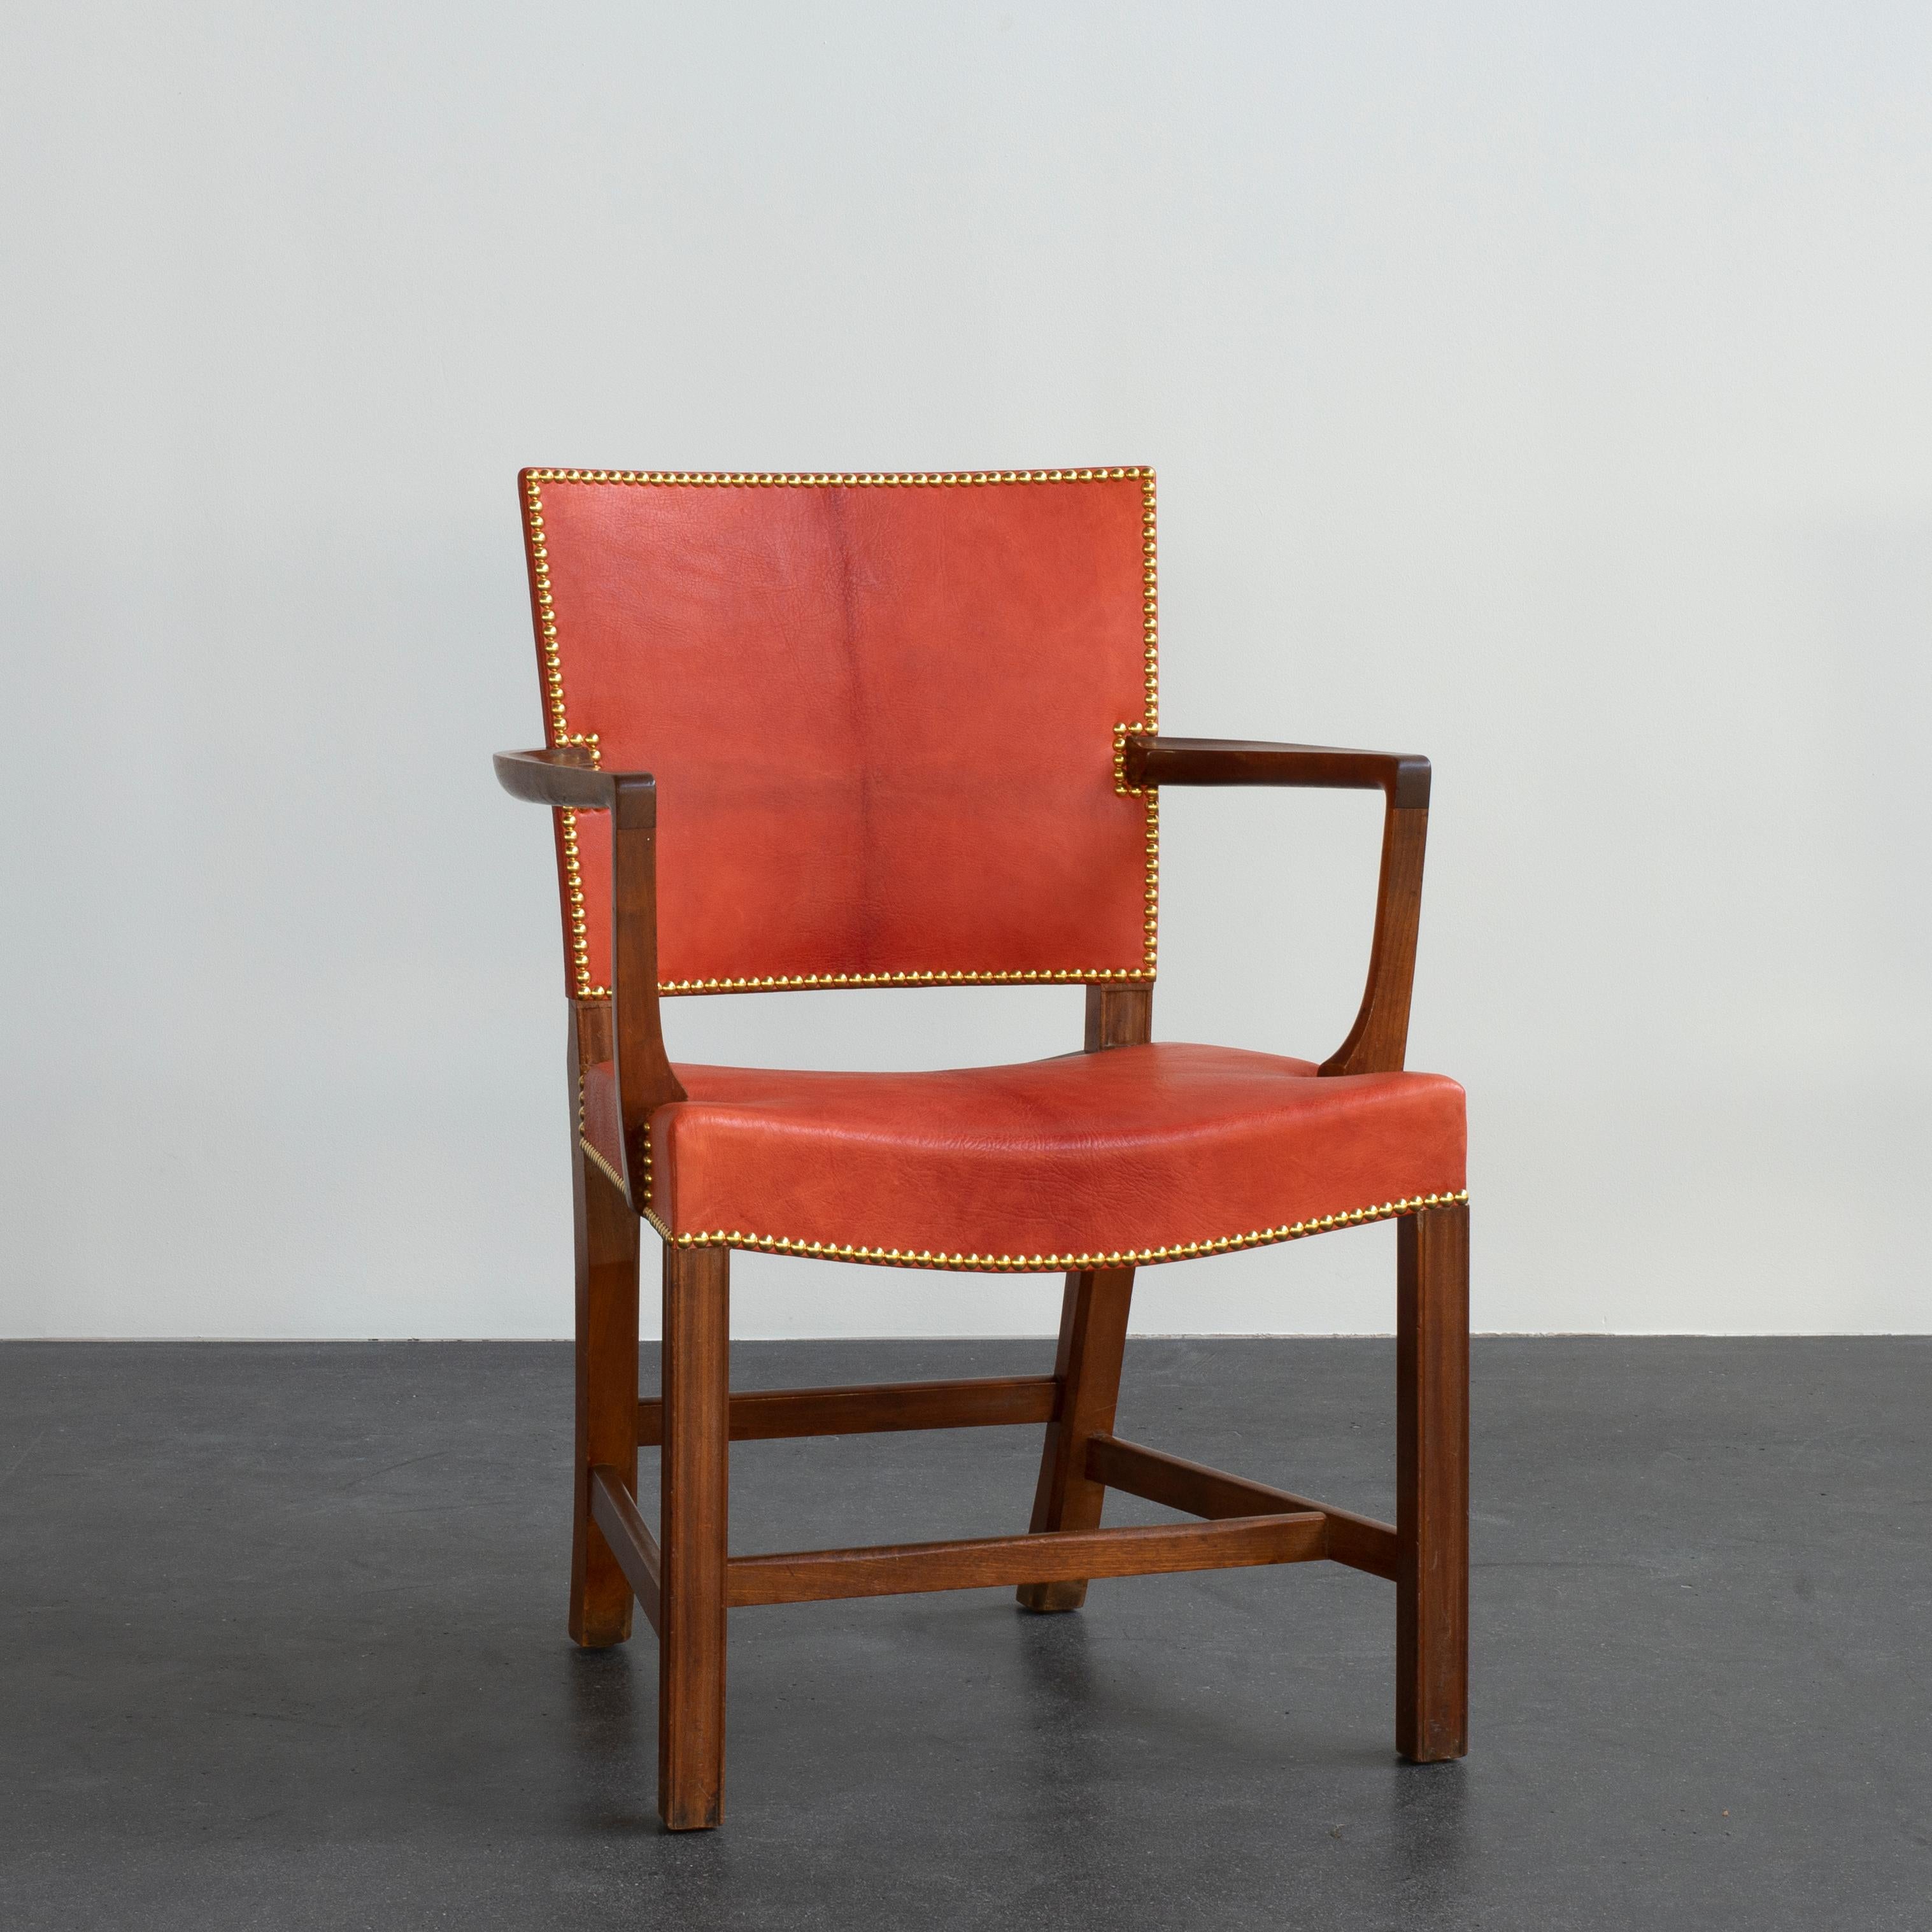 Kaare Klint 'red chair' in Cuban mahogany. Upholstered with Niger leather and brass nails. Executed by Rud. Rasmussen, 1934-1938.

Underside with manufacturer's paper label RUD. RASMUSSENS/SNEDKERIER/45 NØRREBROGAD/KØBENHAVN, pencilled serial